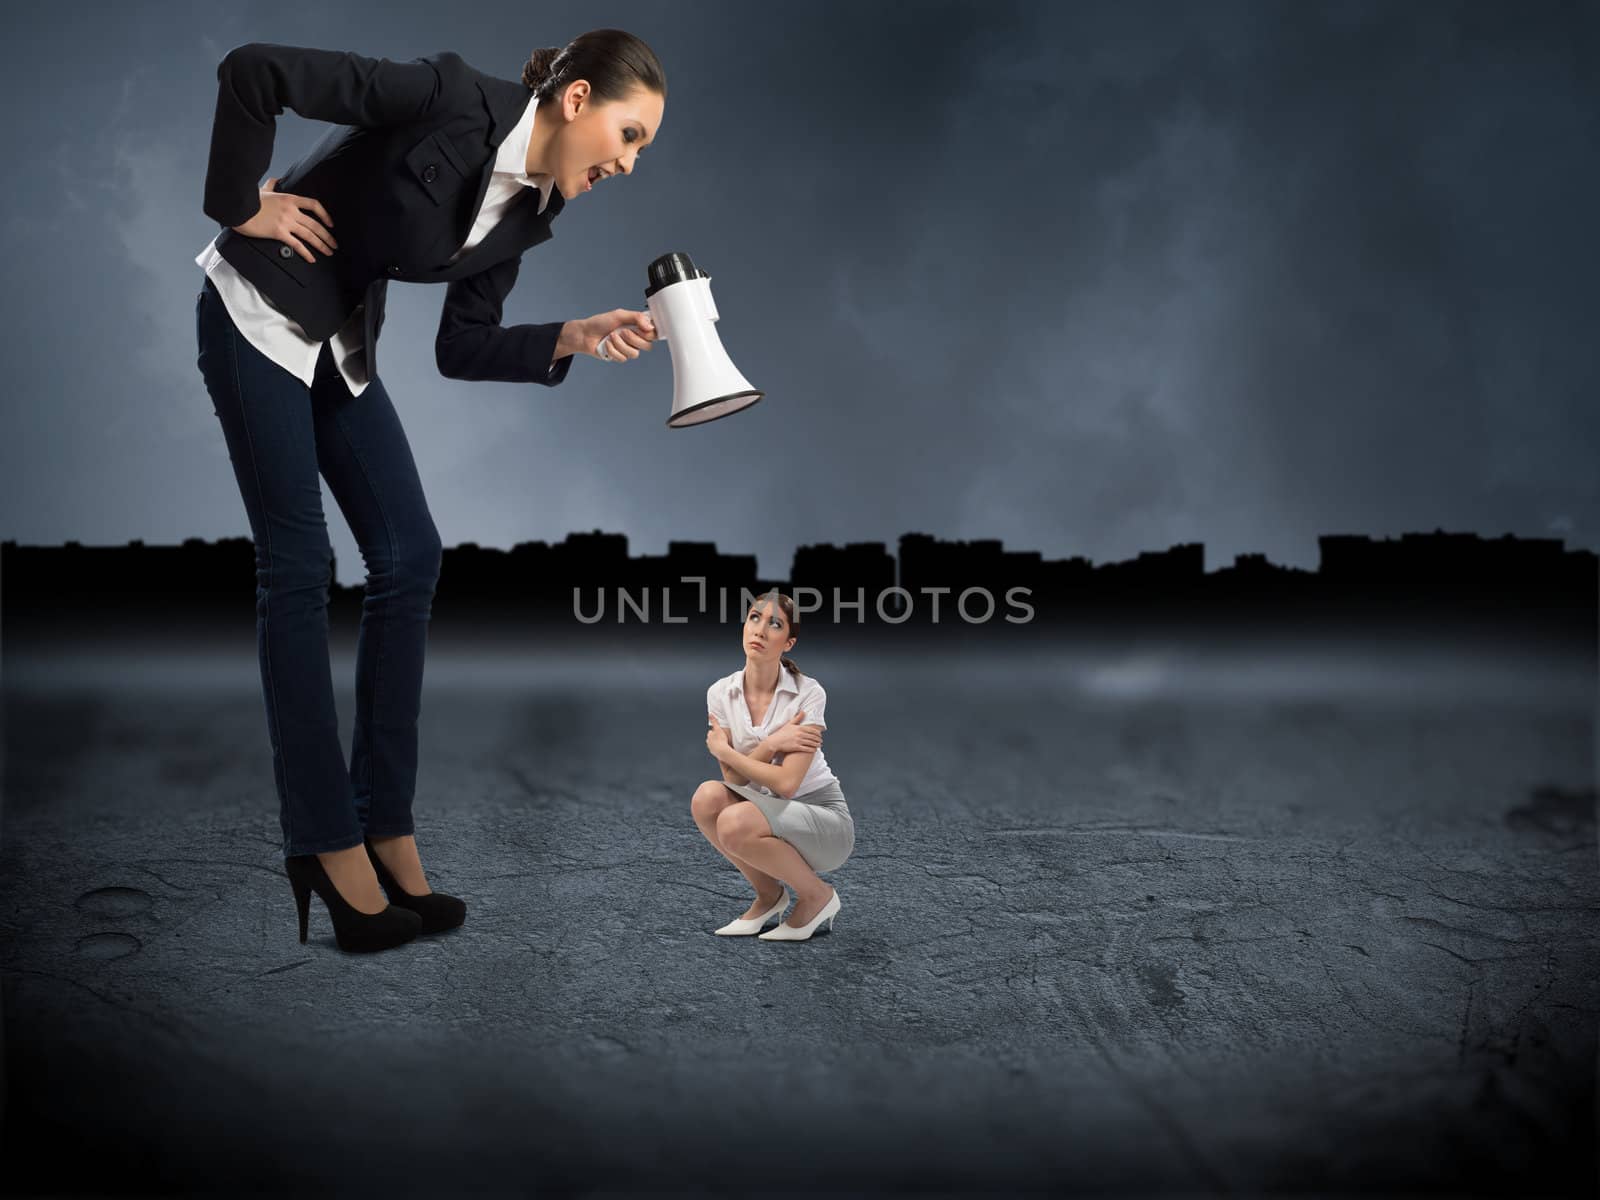 Business woman yelling at a small woman sitting on the ground, the concept of aggression